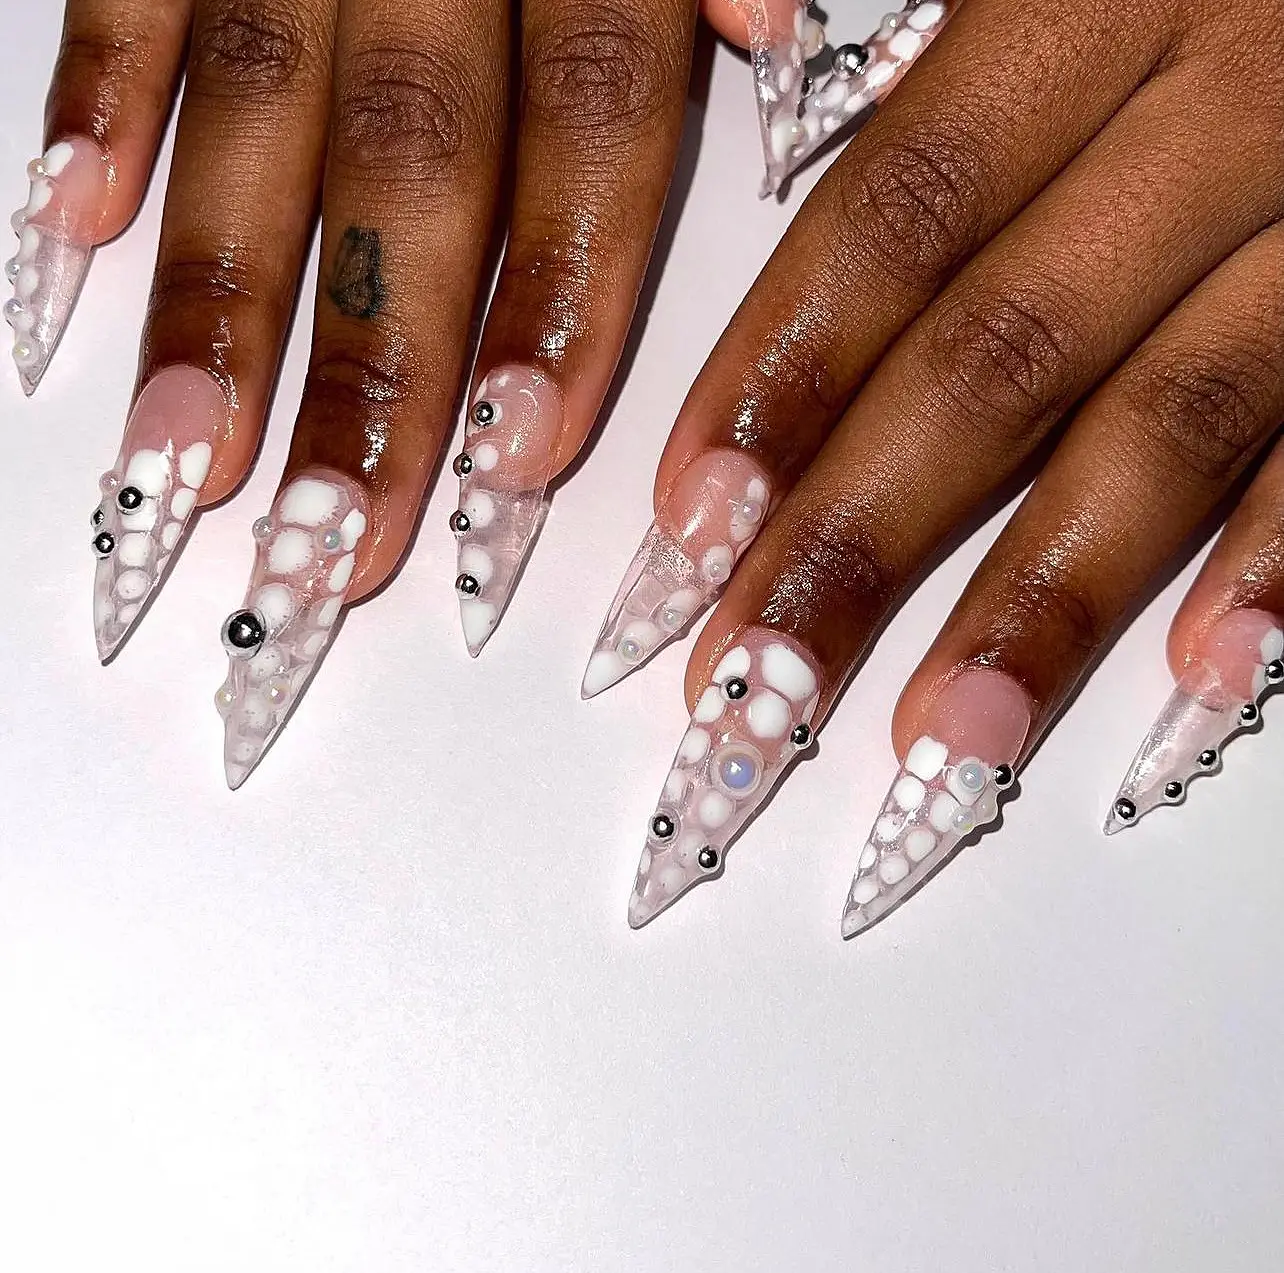 Airbrush Nail Inspo 💅🏽, Gallery posted by IBRenee